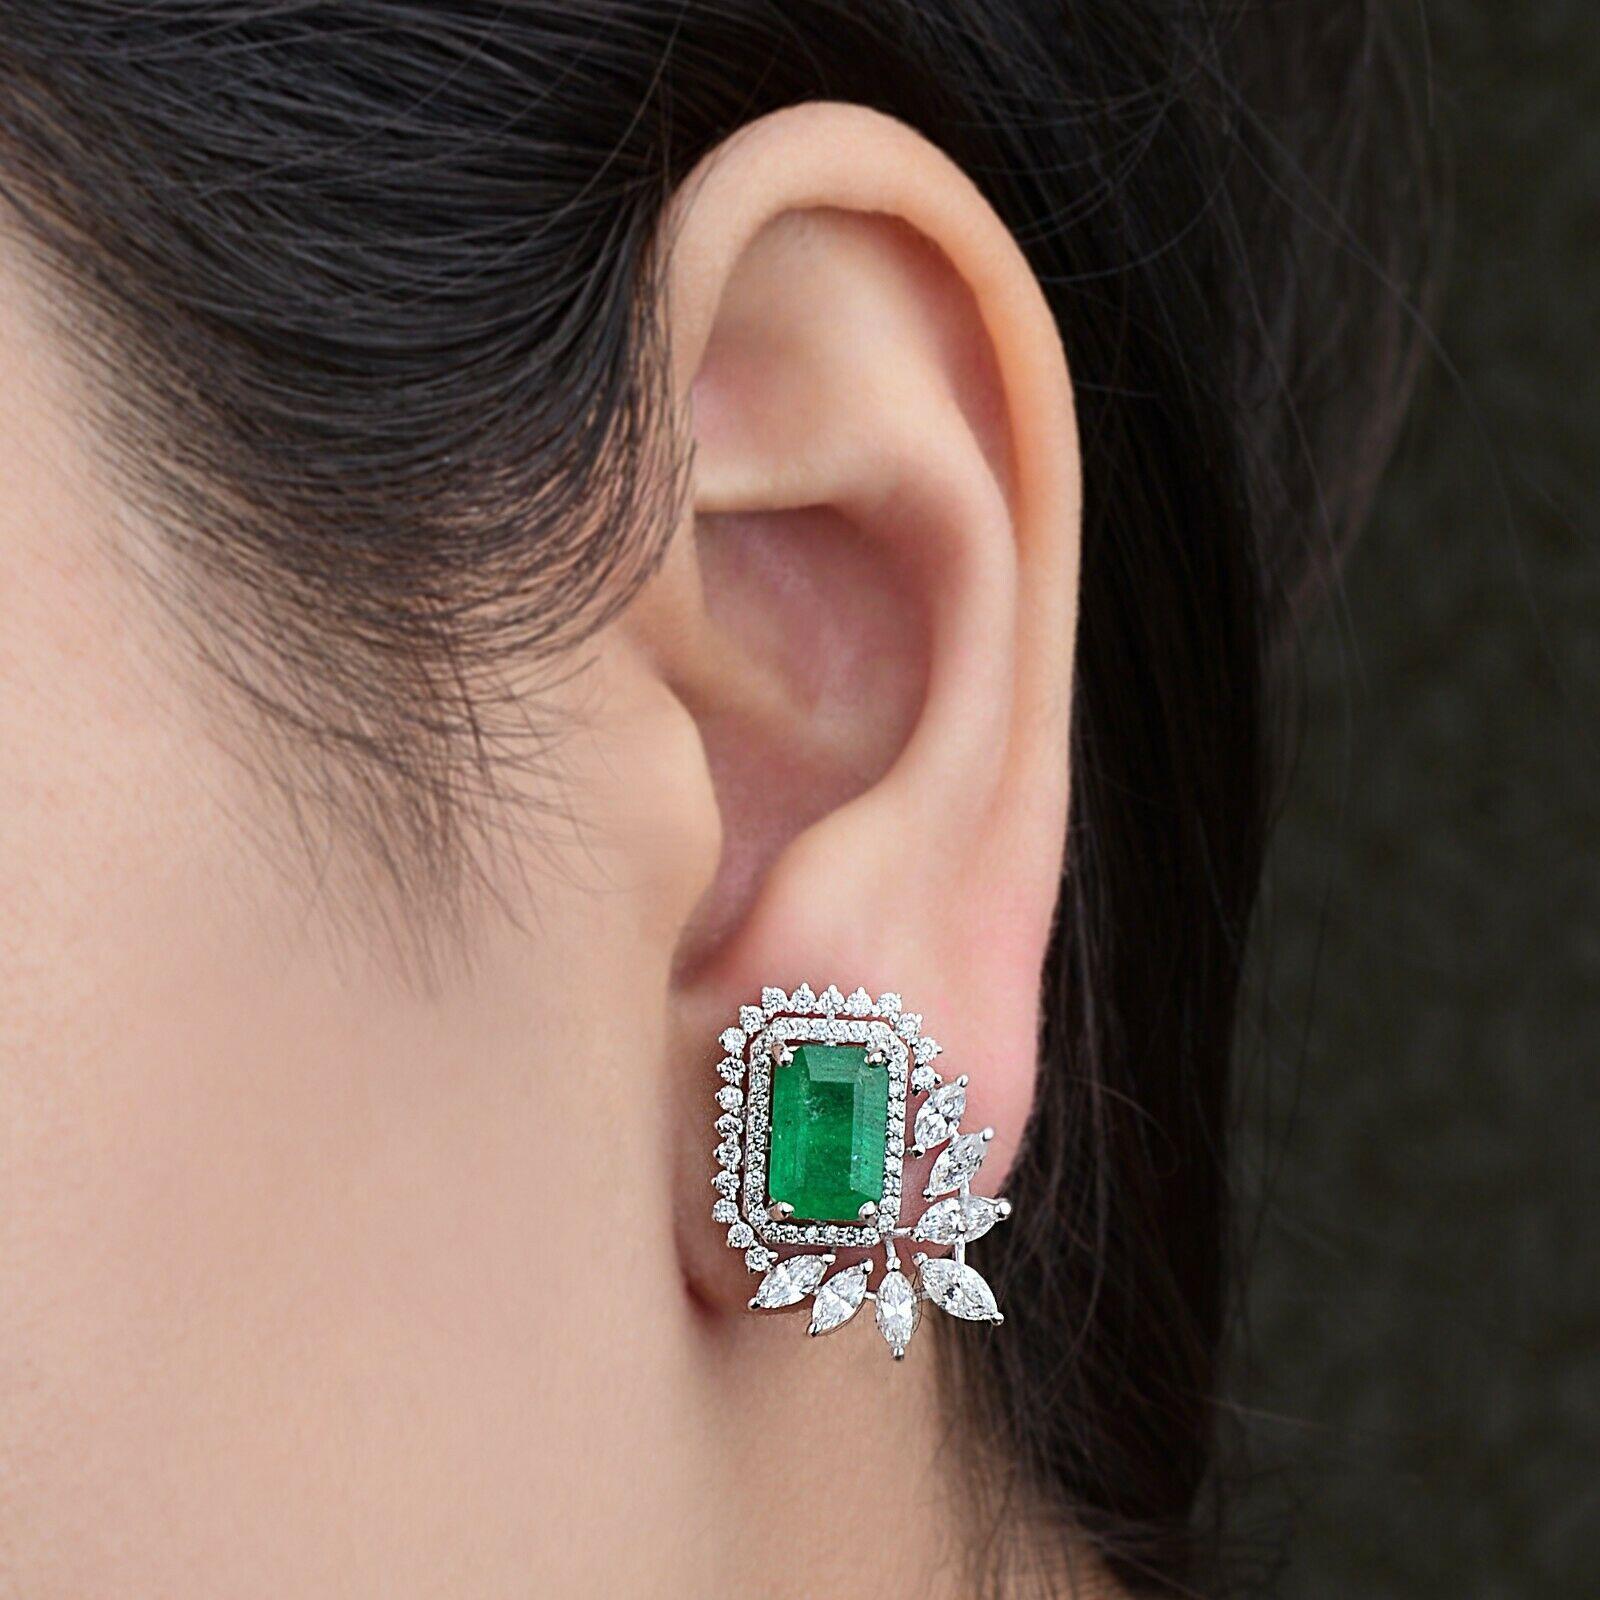 Cast in 14 karat gold, these stud earrings are hand set with 3.06 carats emerald and 2.40 carats of glimmering diamonds. 

FOLLOW MEGHNA JEWELS storefront to view the latest collection & exclusive pieces. Meghna Jewels is proudly rated as a Top